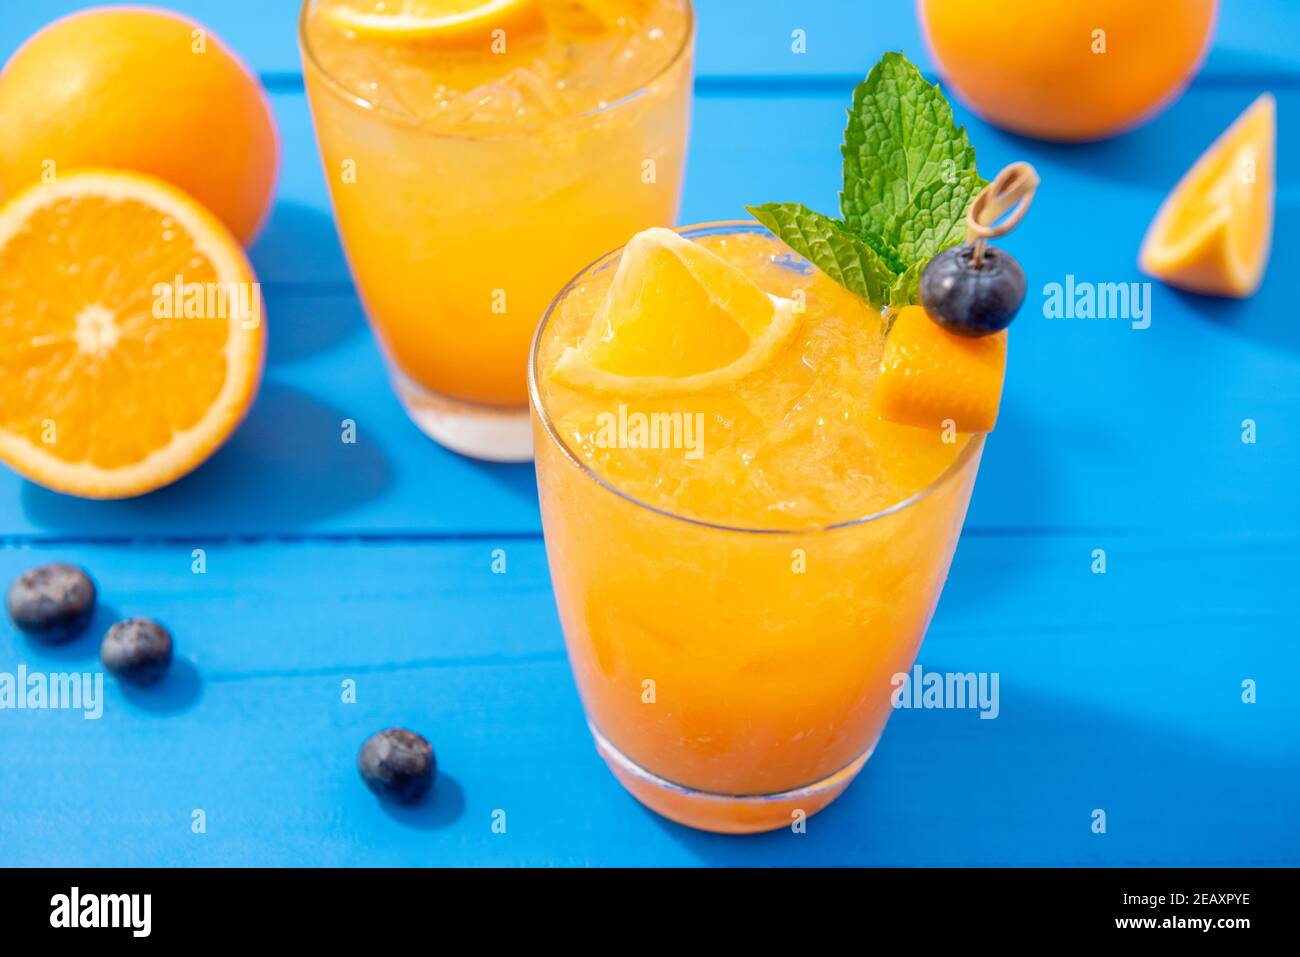 Fresh fruit juice mocktail drinks in the glasses with oranges and blueberries on colorful blue table Stock Photo